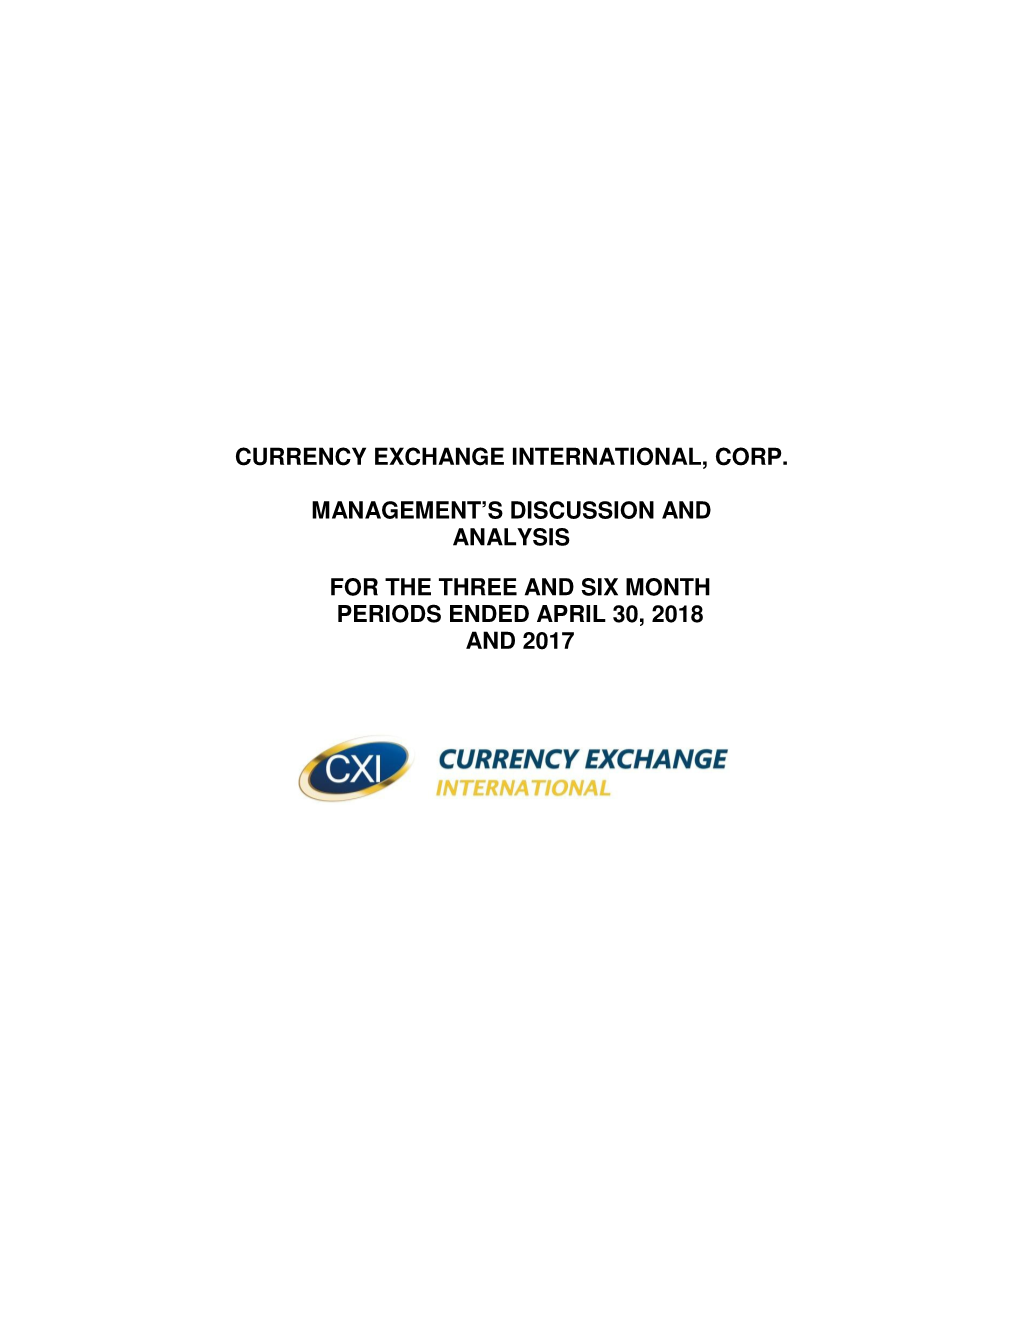 Currency Exchange International, Corp